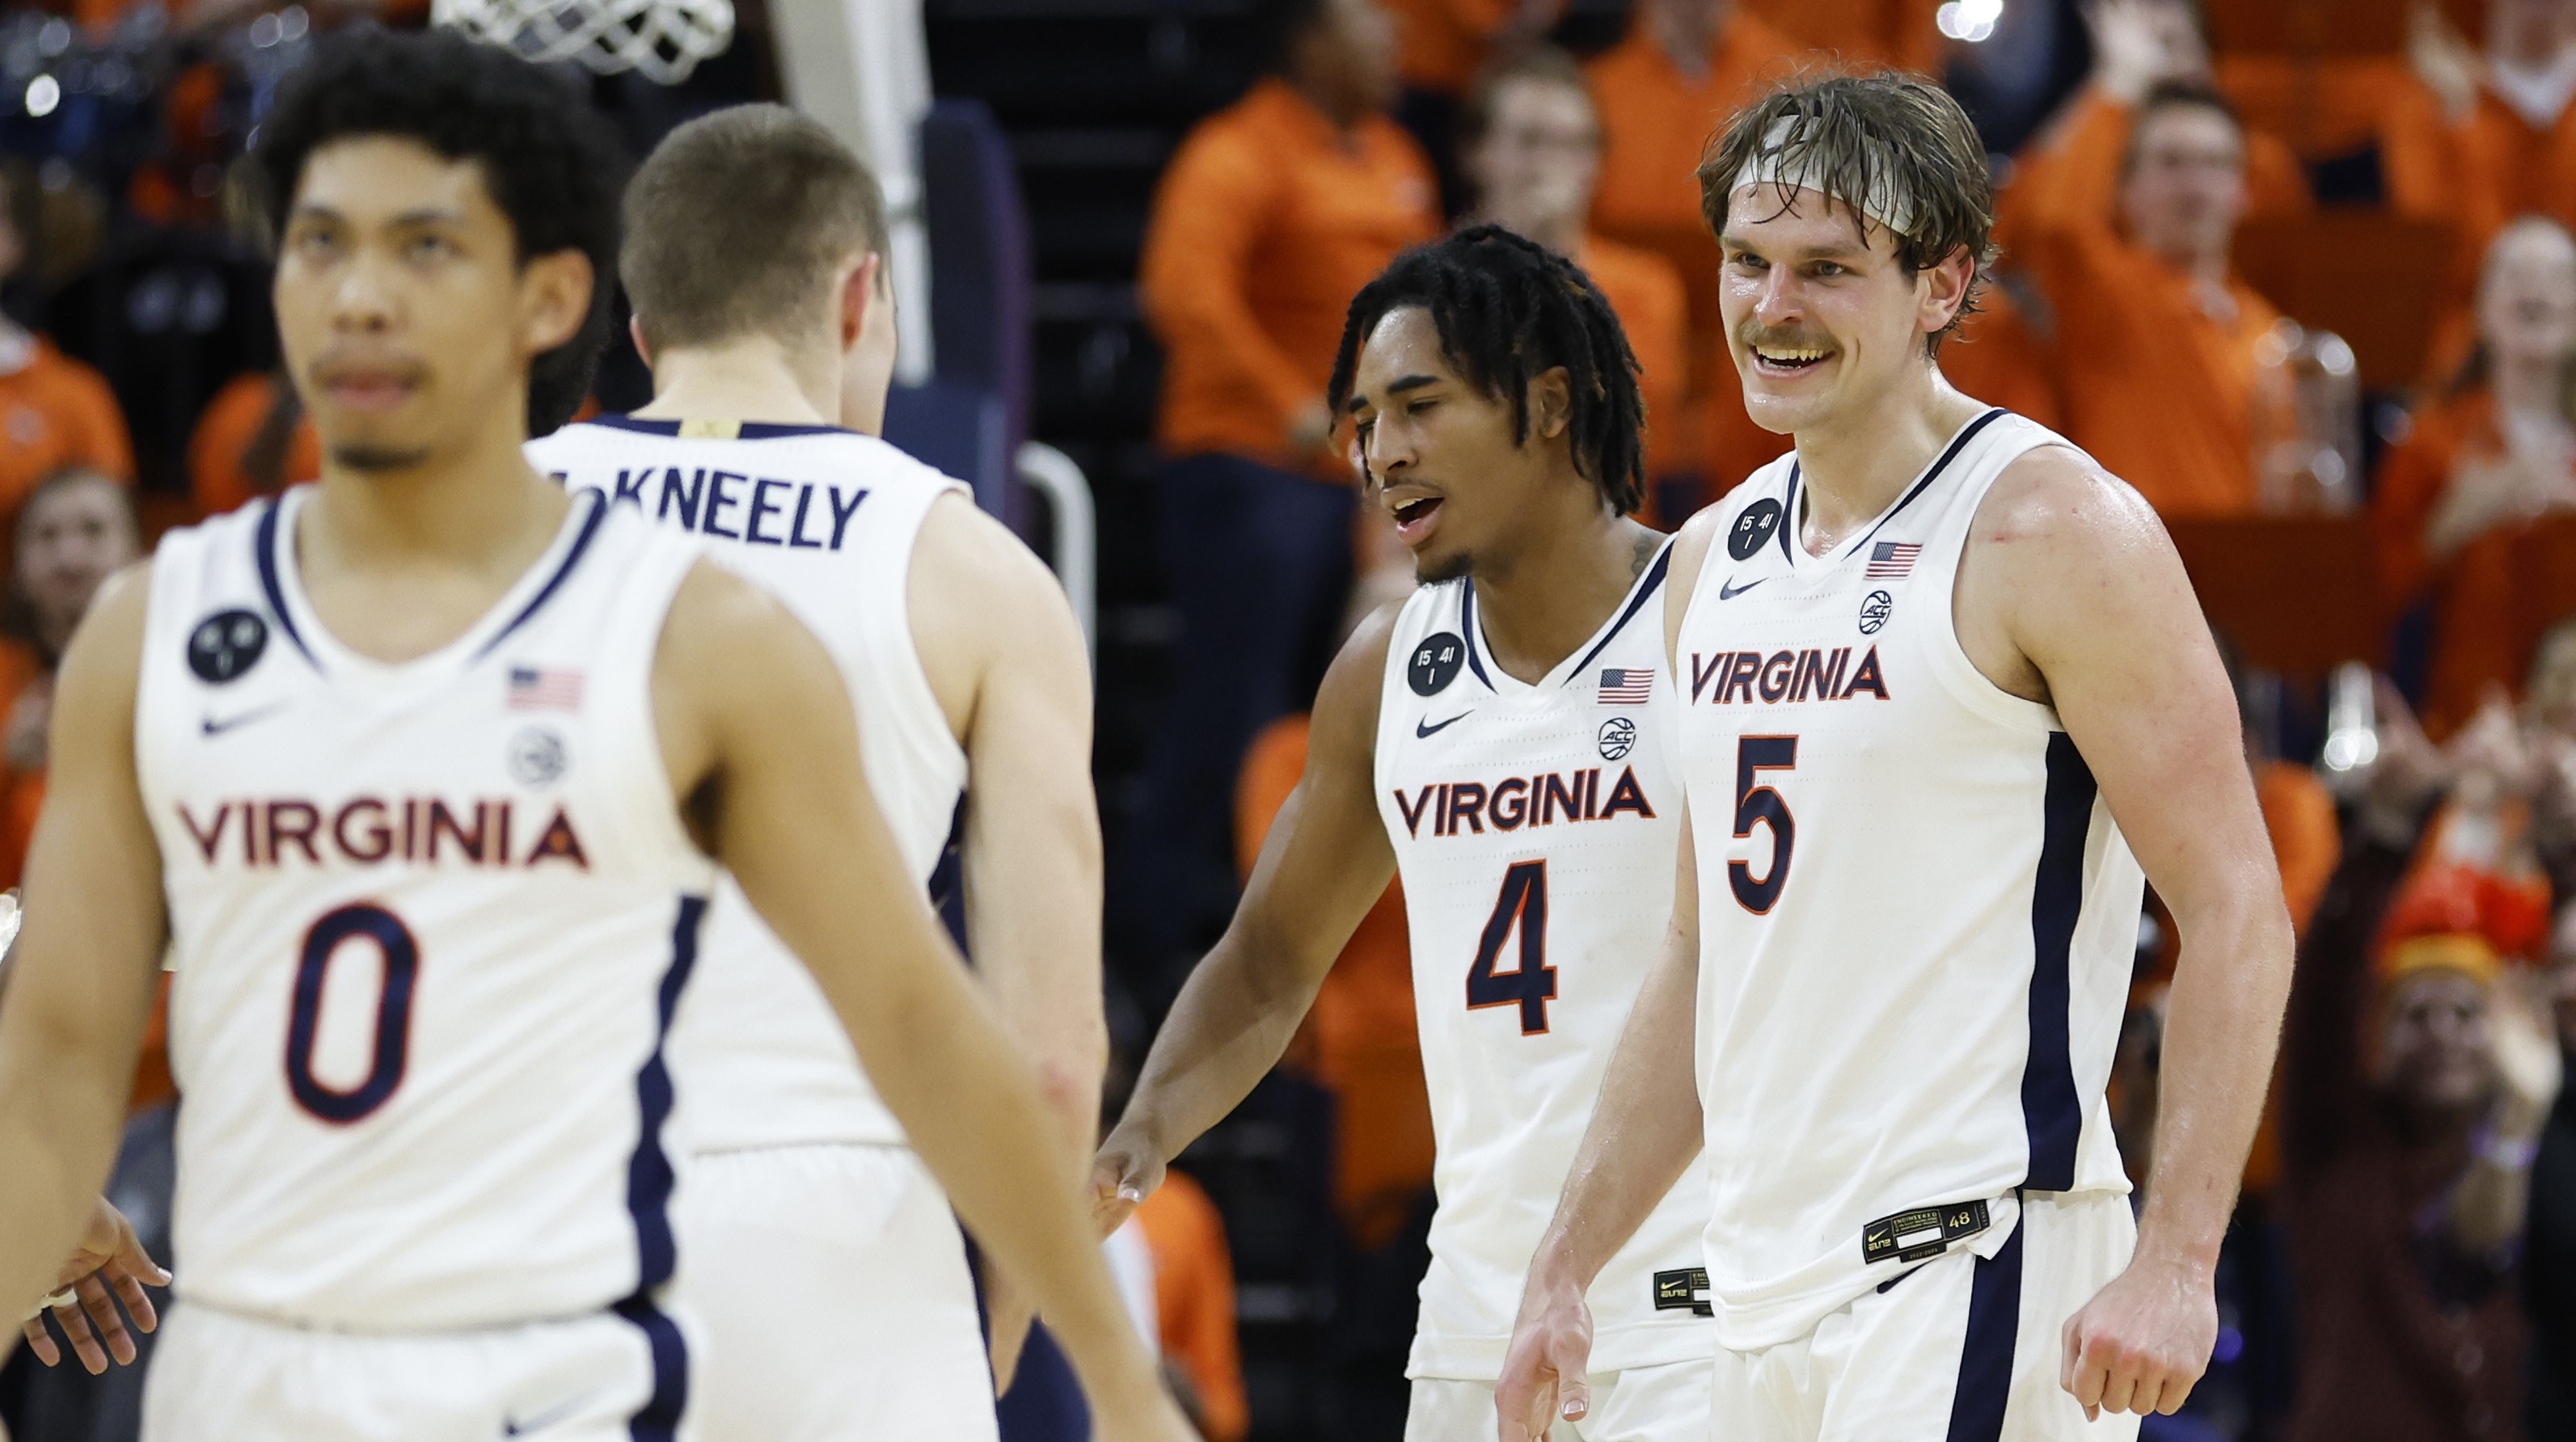 WATCH Highlights & Postgame From Virginia's Win Over North Carolina